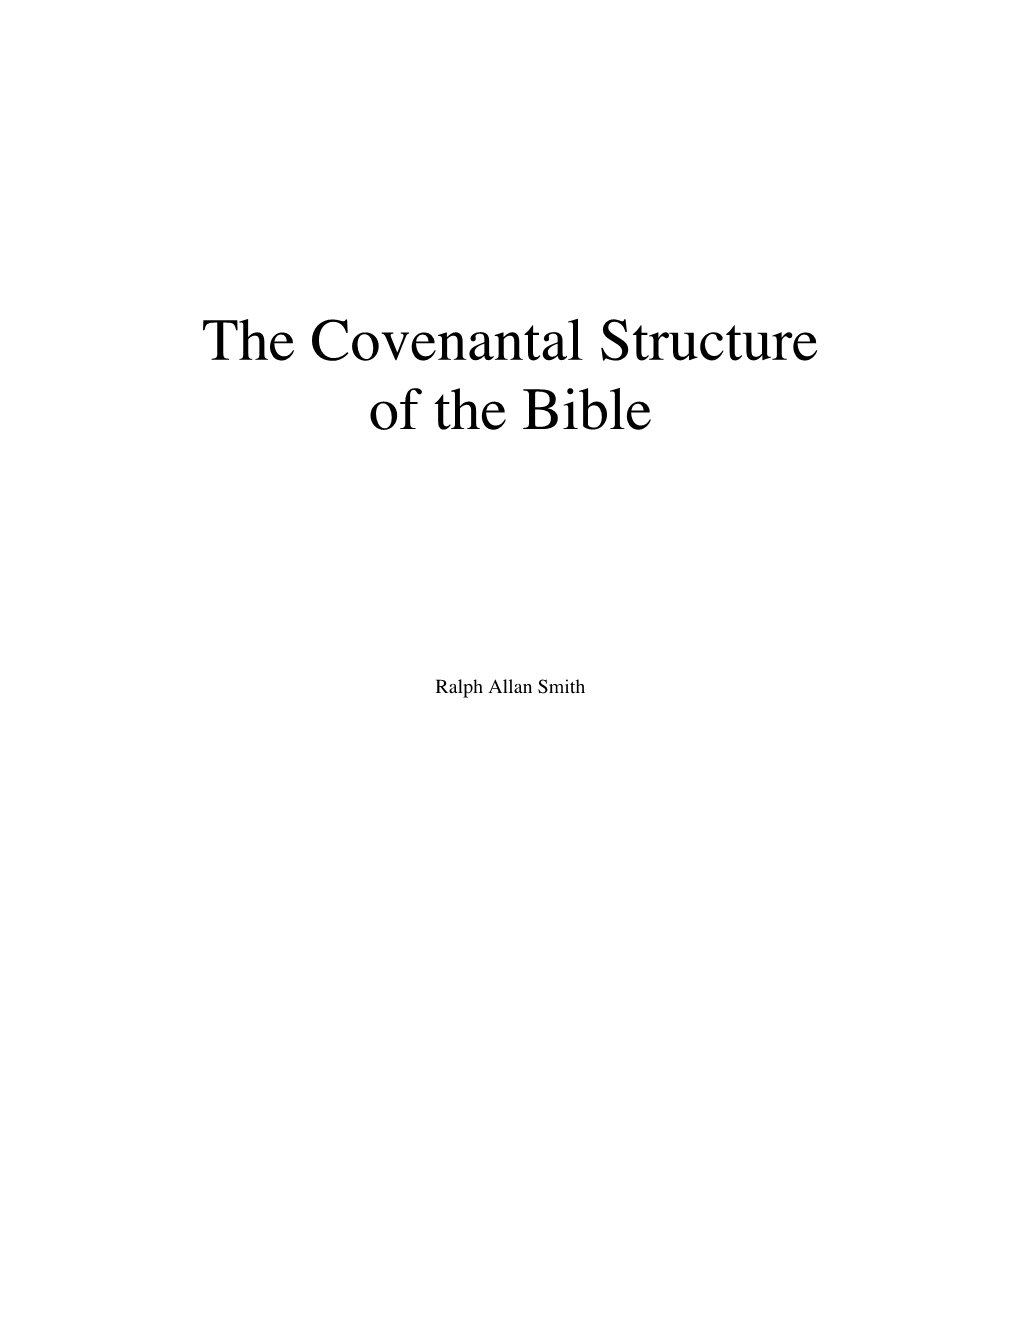 The Covenantal Structure of the Bible